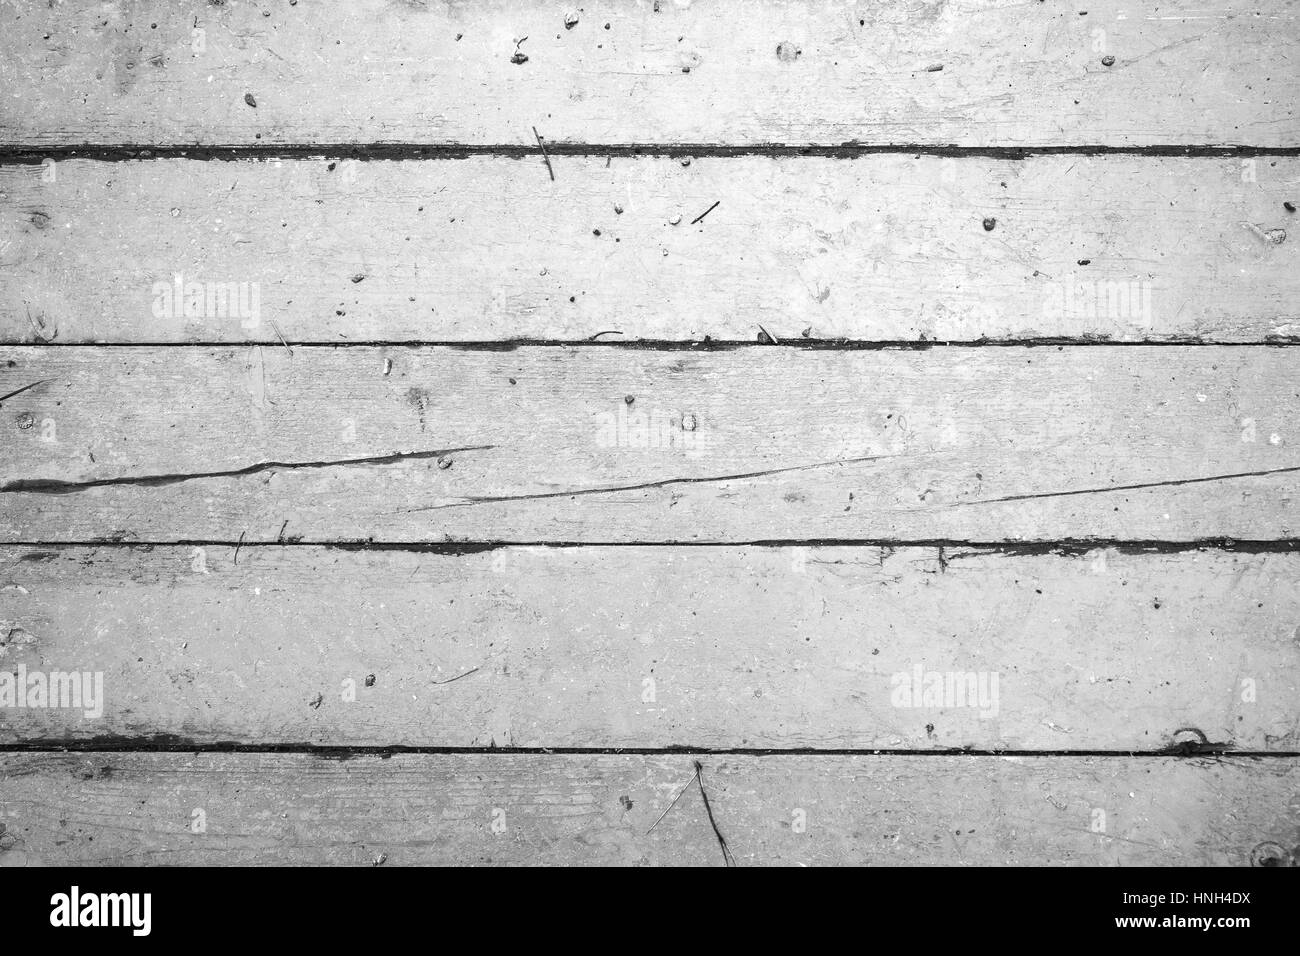 Wood board wall texture background in black&white Stock Photo